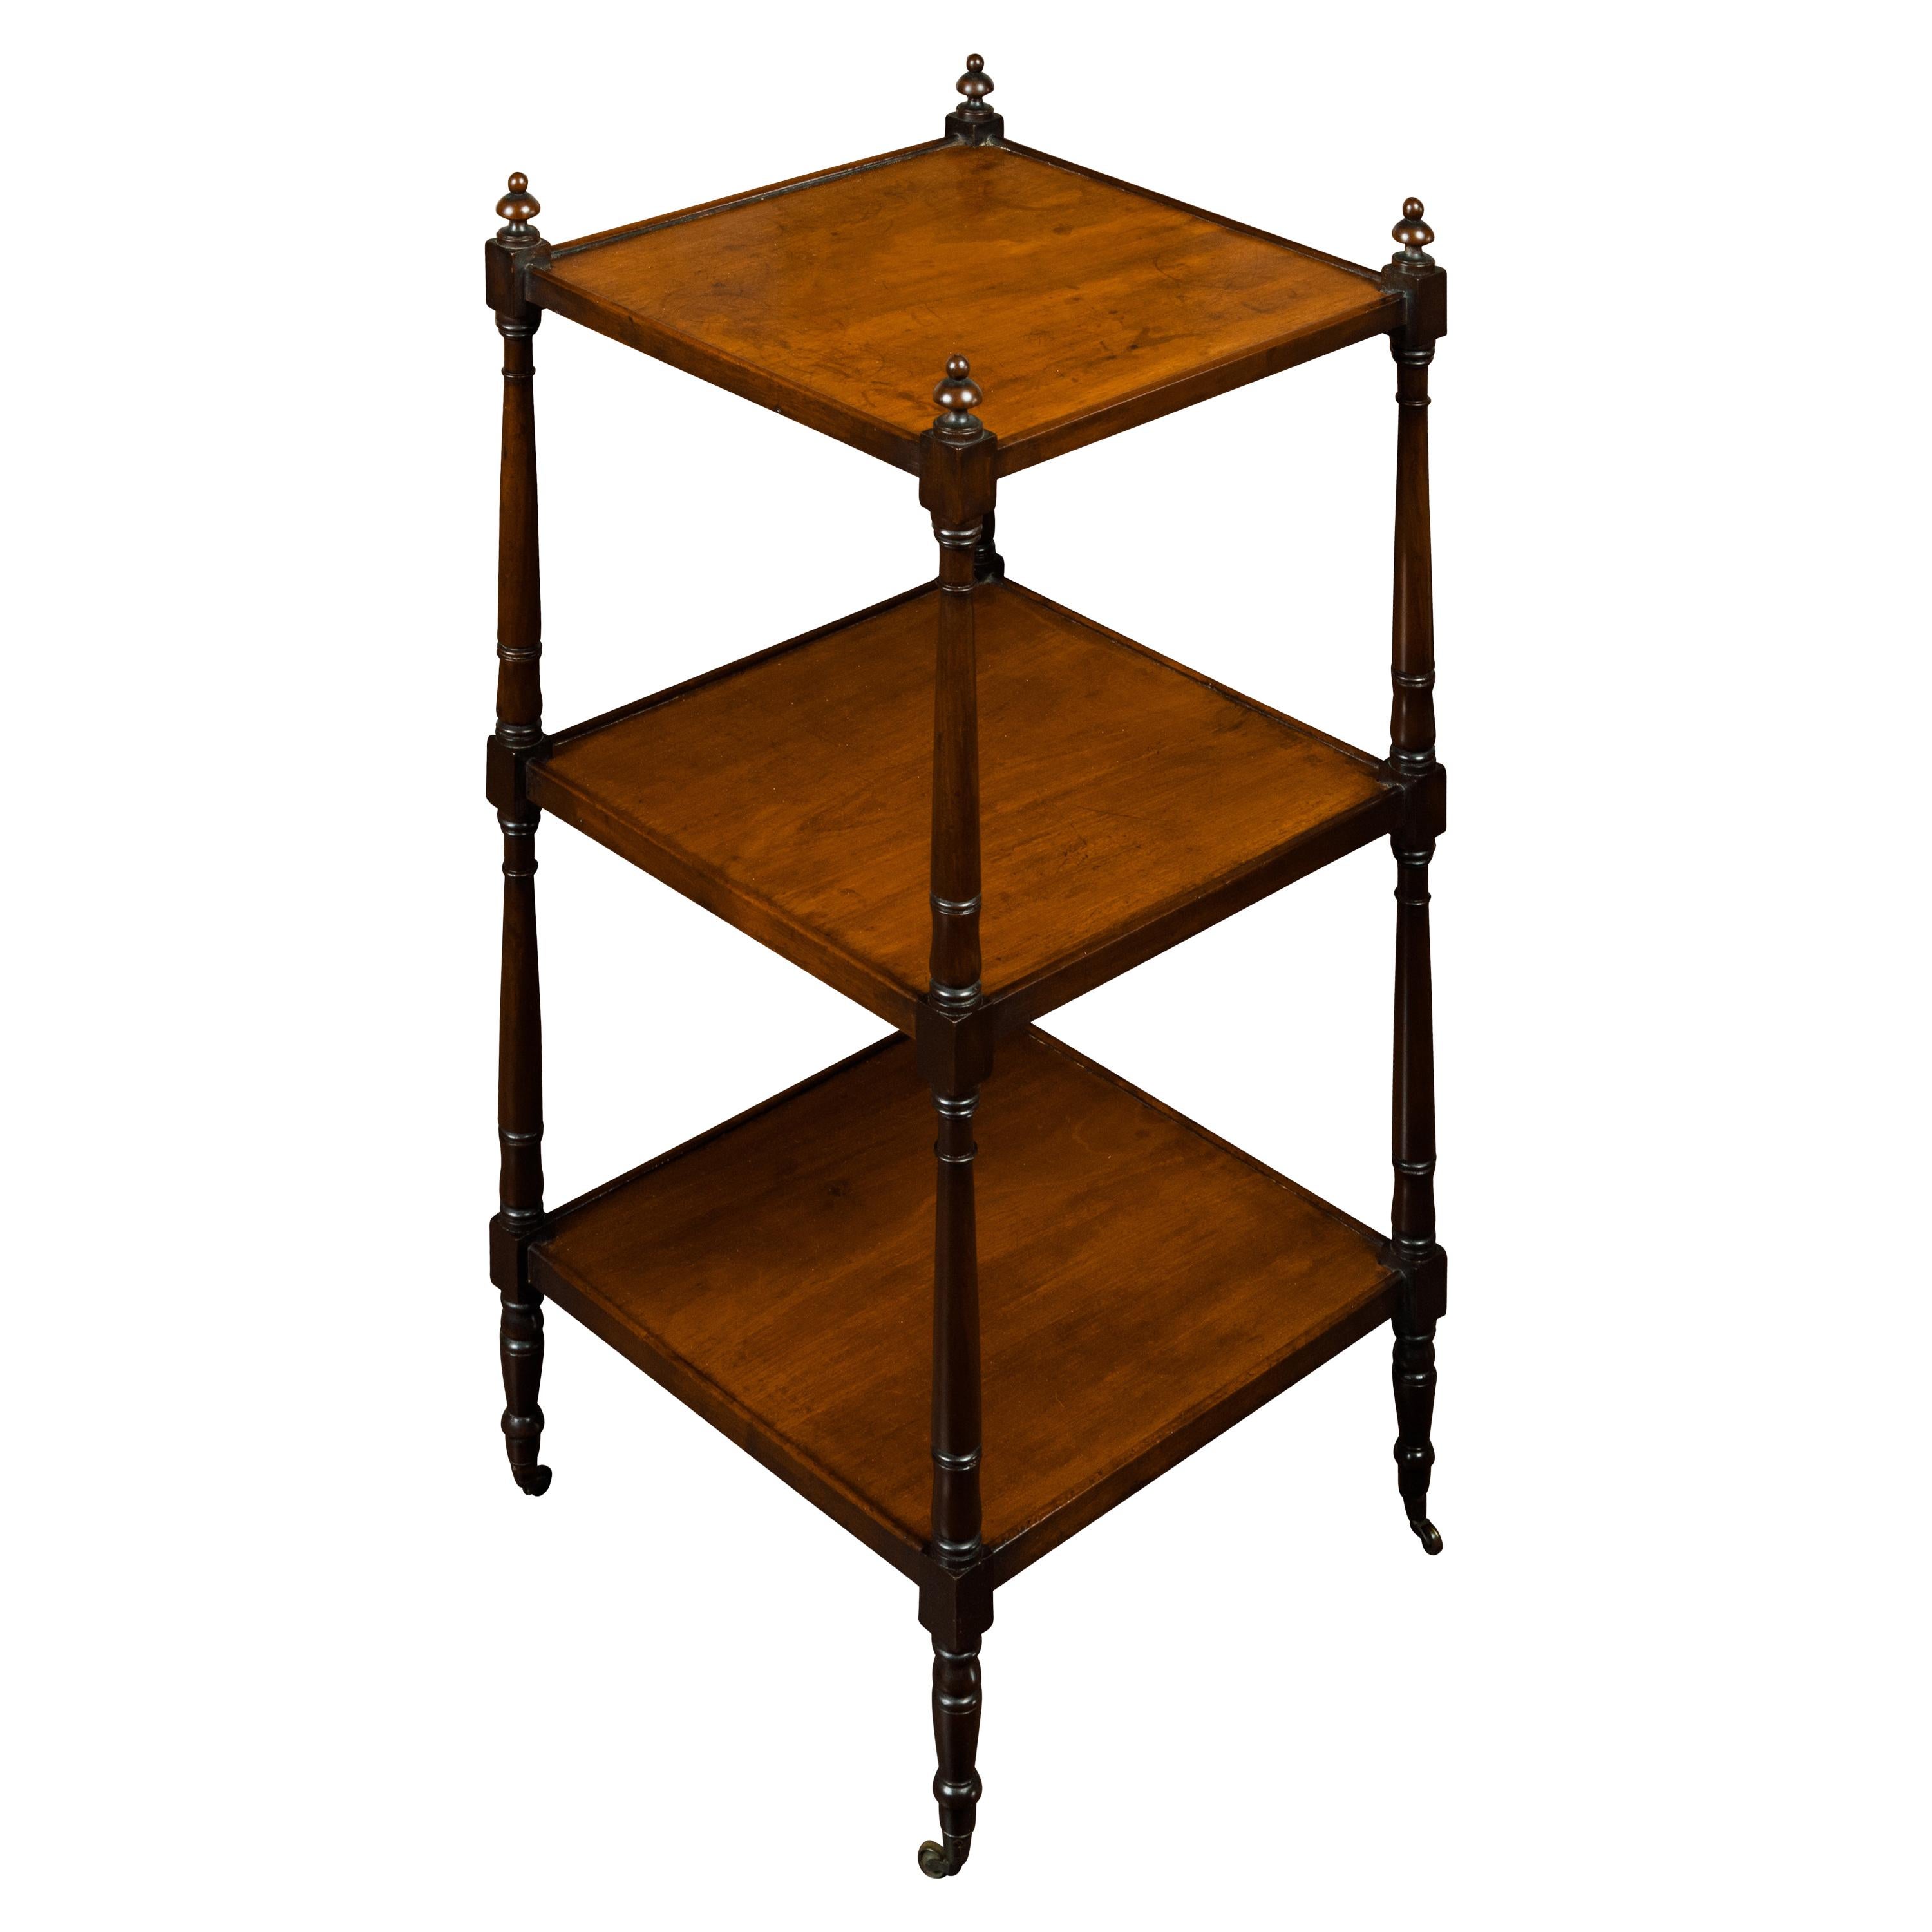 English 1870s Mahogany Three-Tiered Trolley with Turned Side Posts and Casters